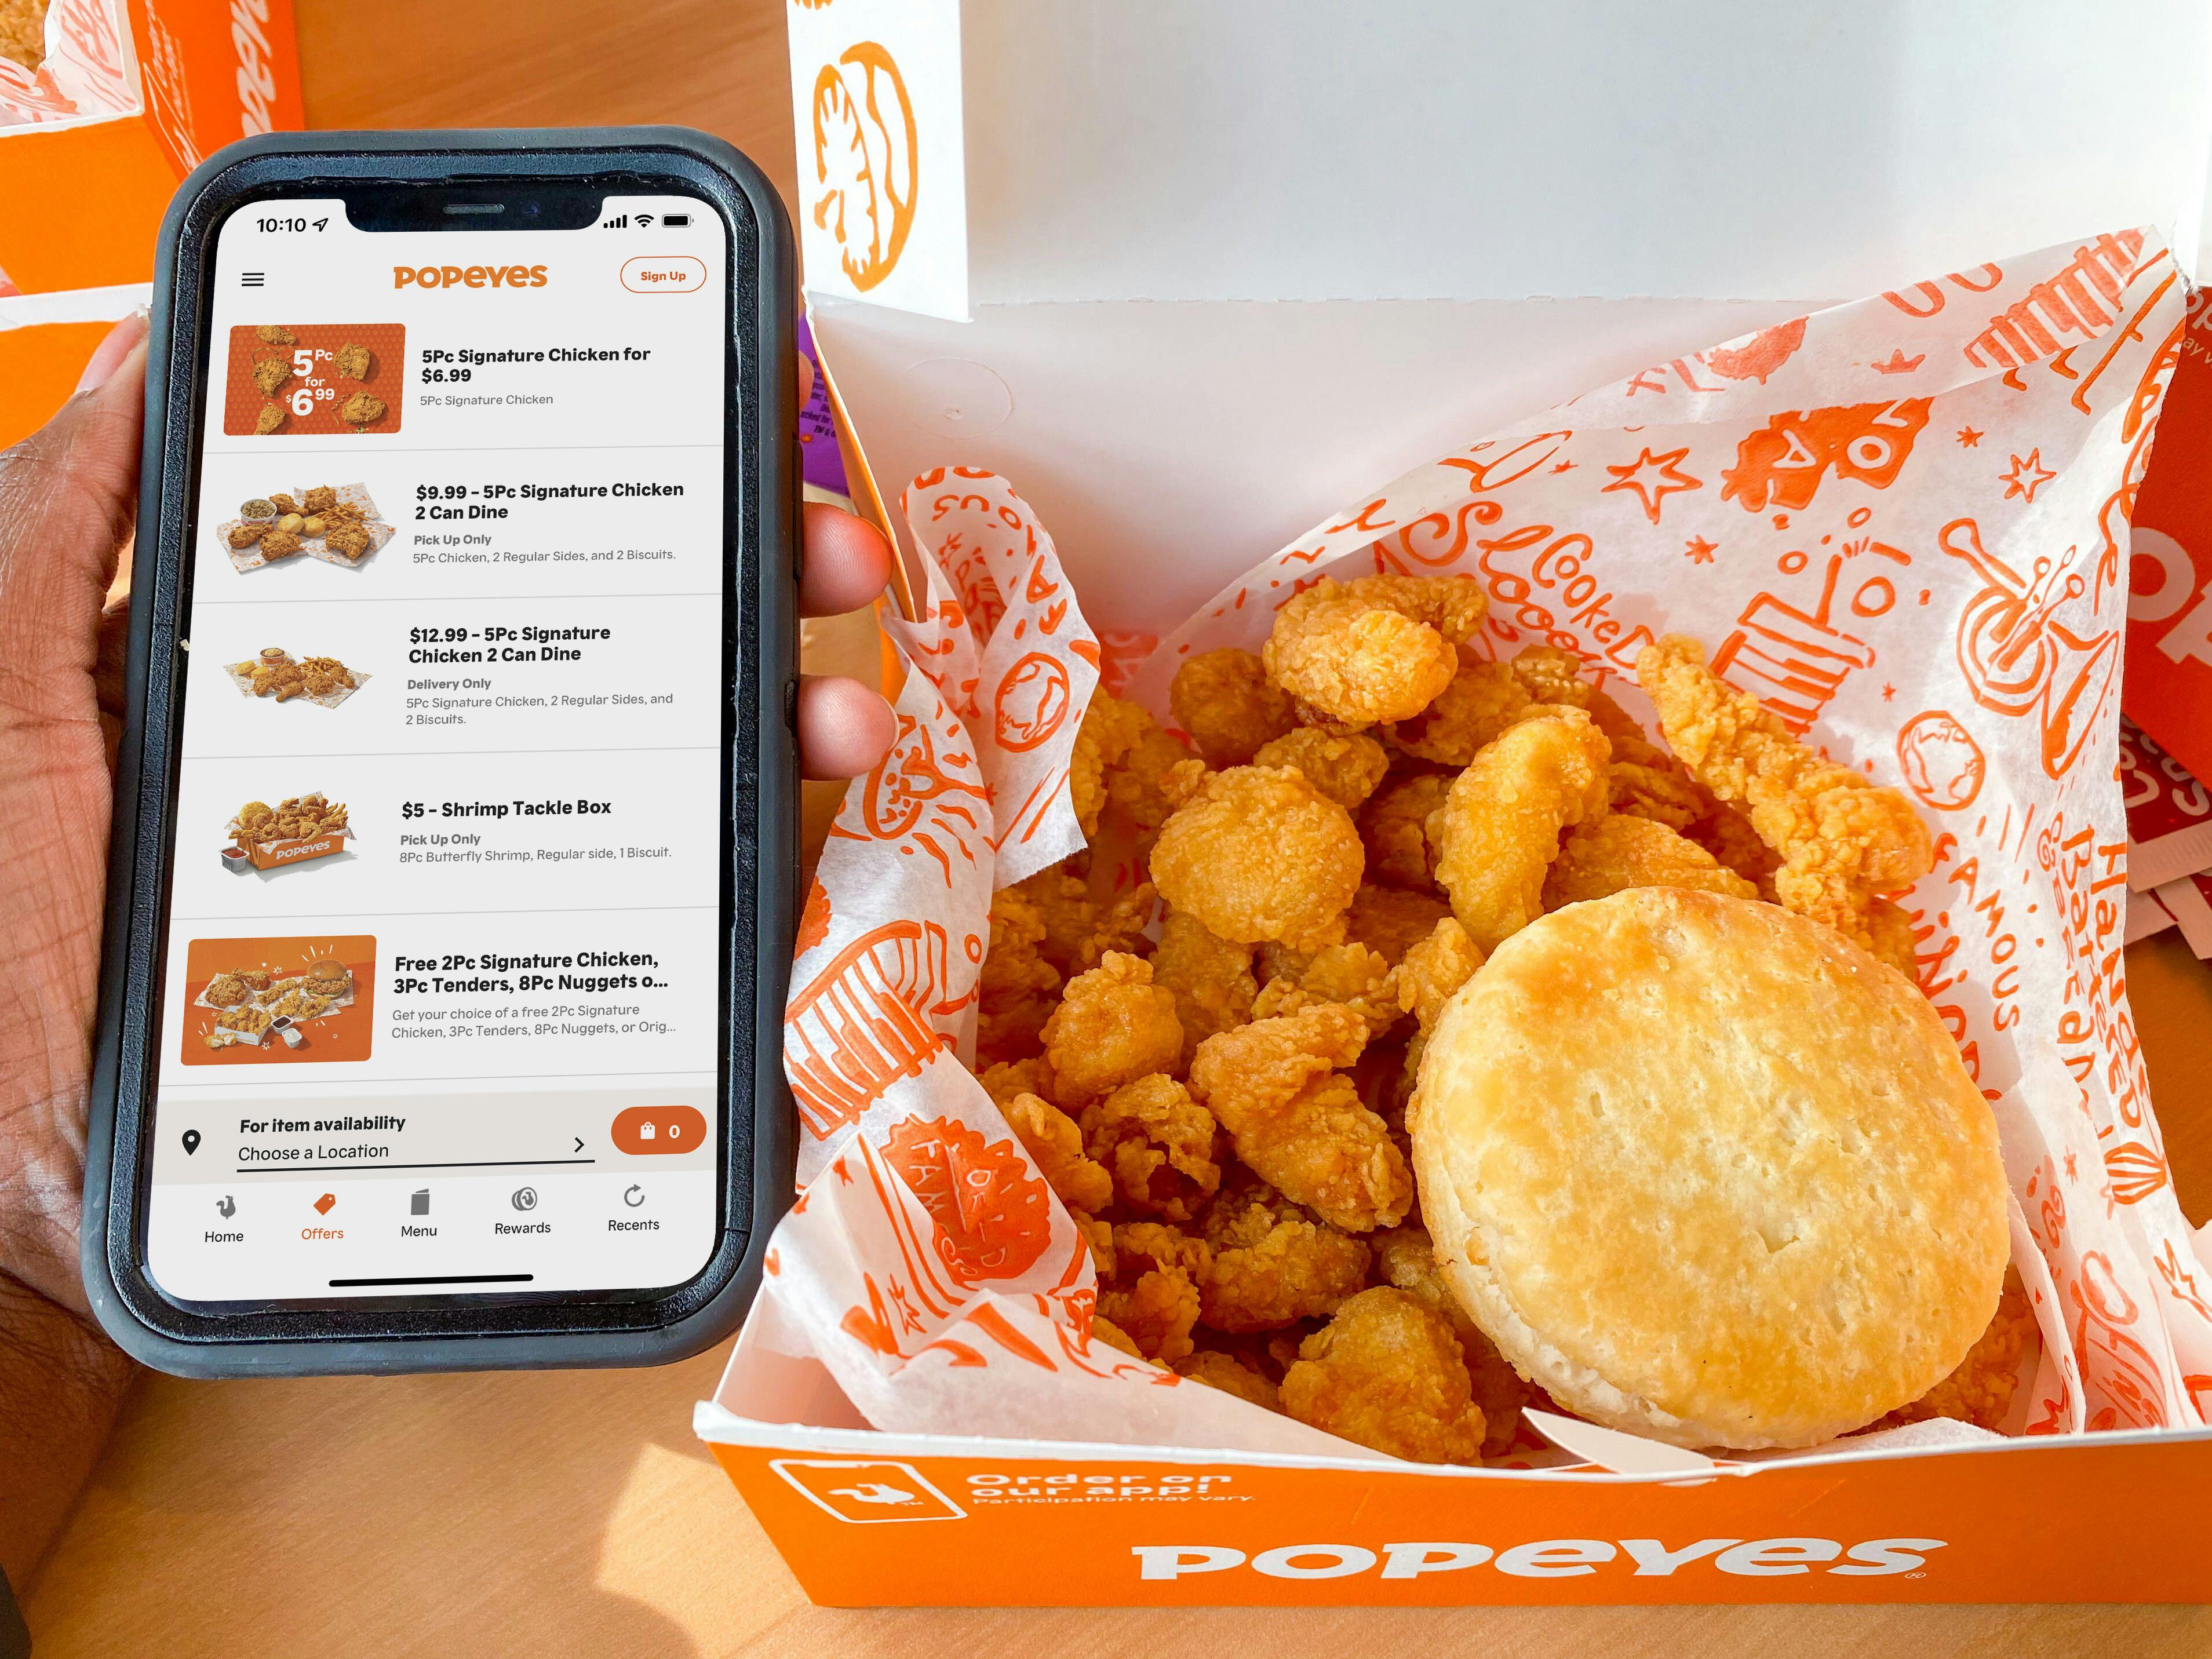 A person holding an iPhone displayng the Popeyes app next to a box of Popeyes chicken and a biscuit sitting on a table.